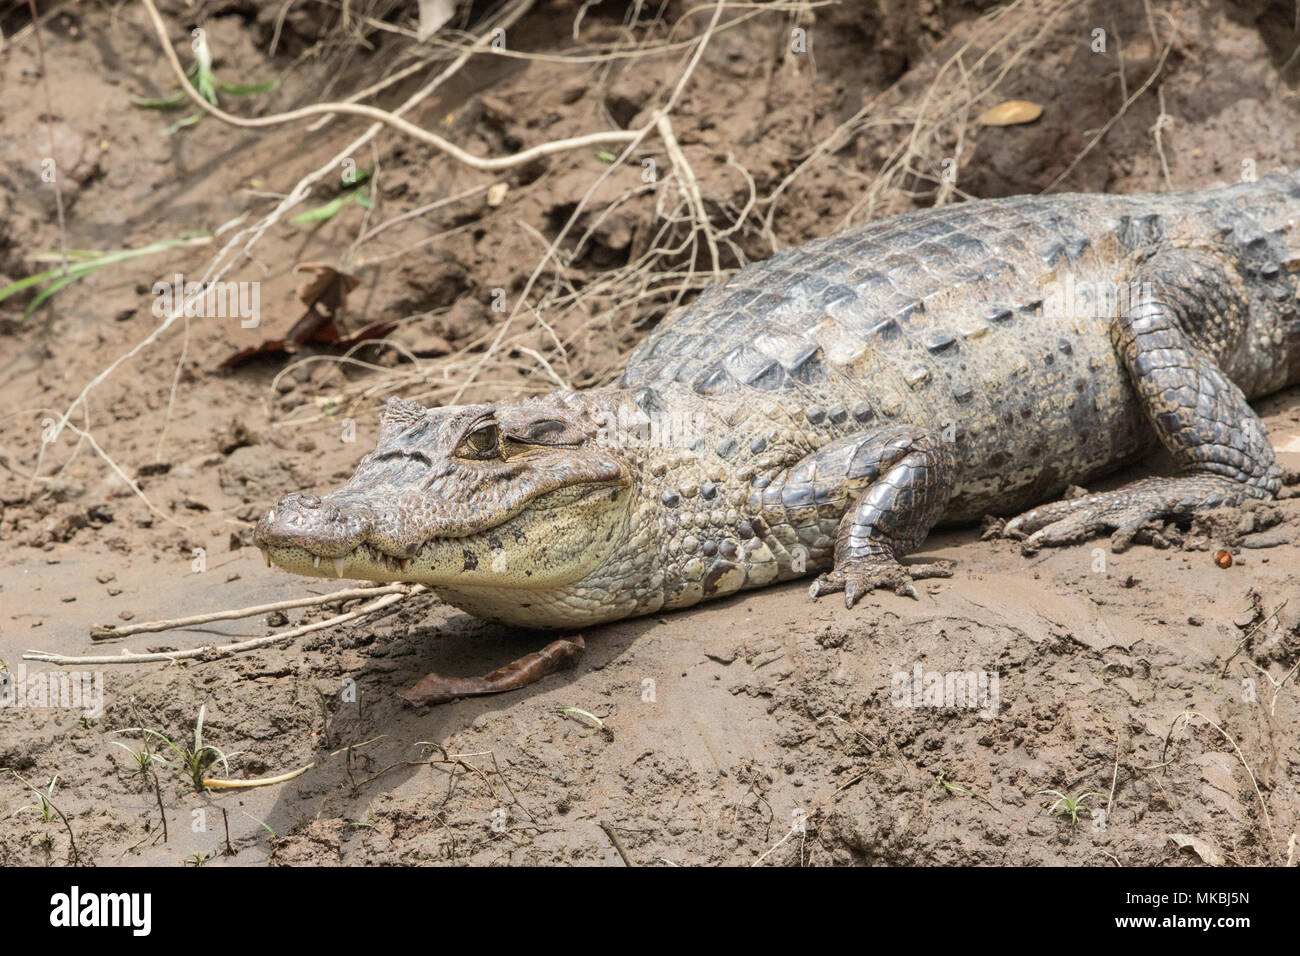 spectacled caiman Caiman crocodilus adult resting on mud on river bank, Costa Rica Stock Photo